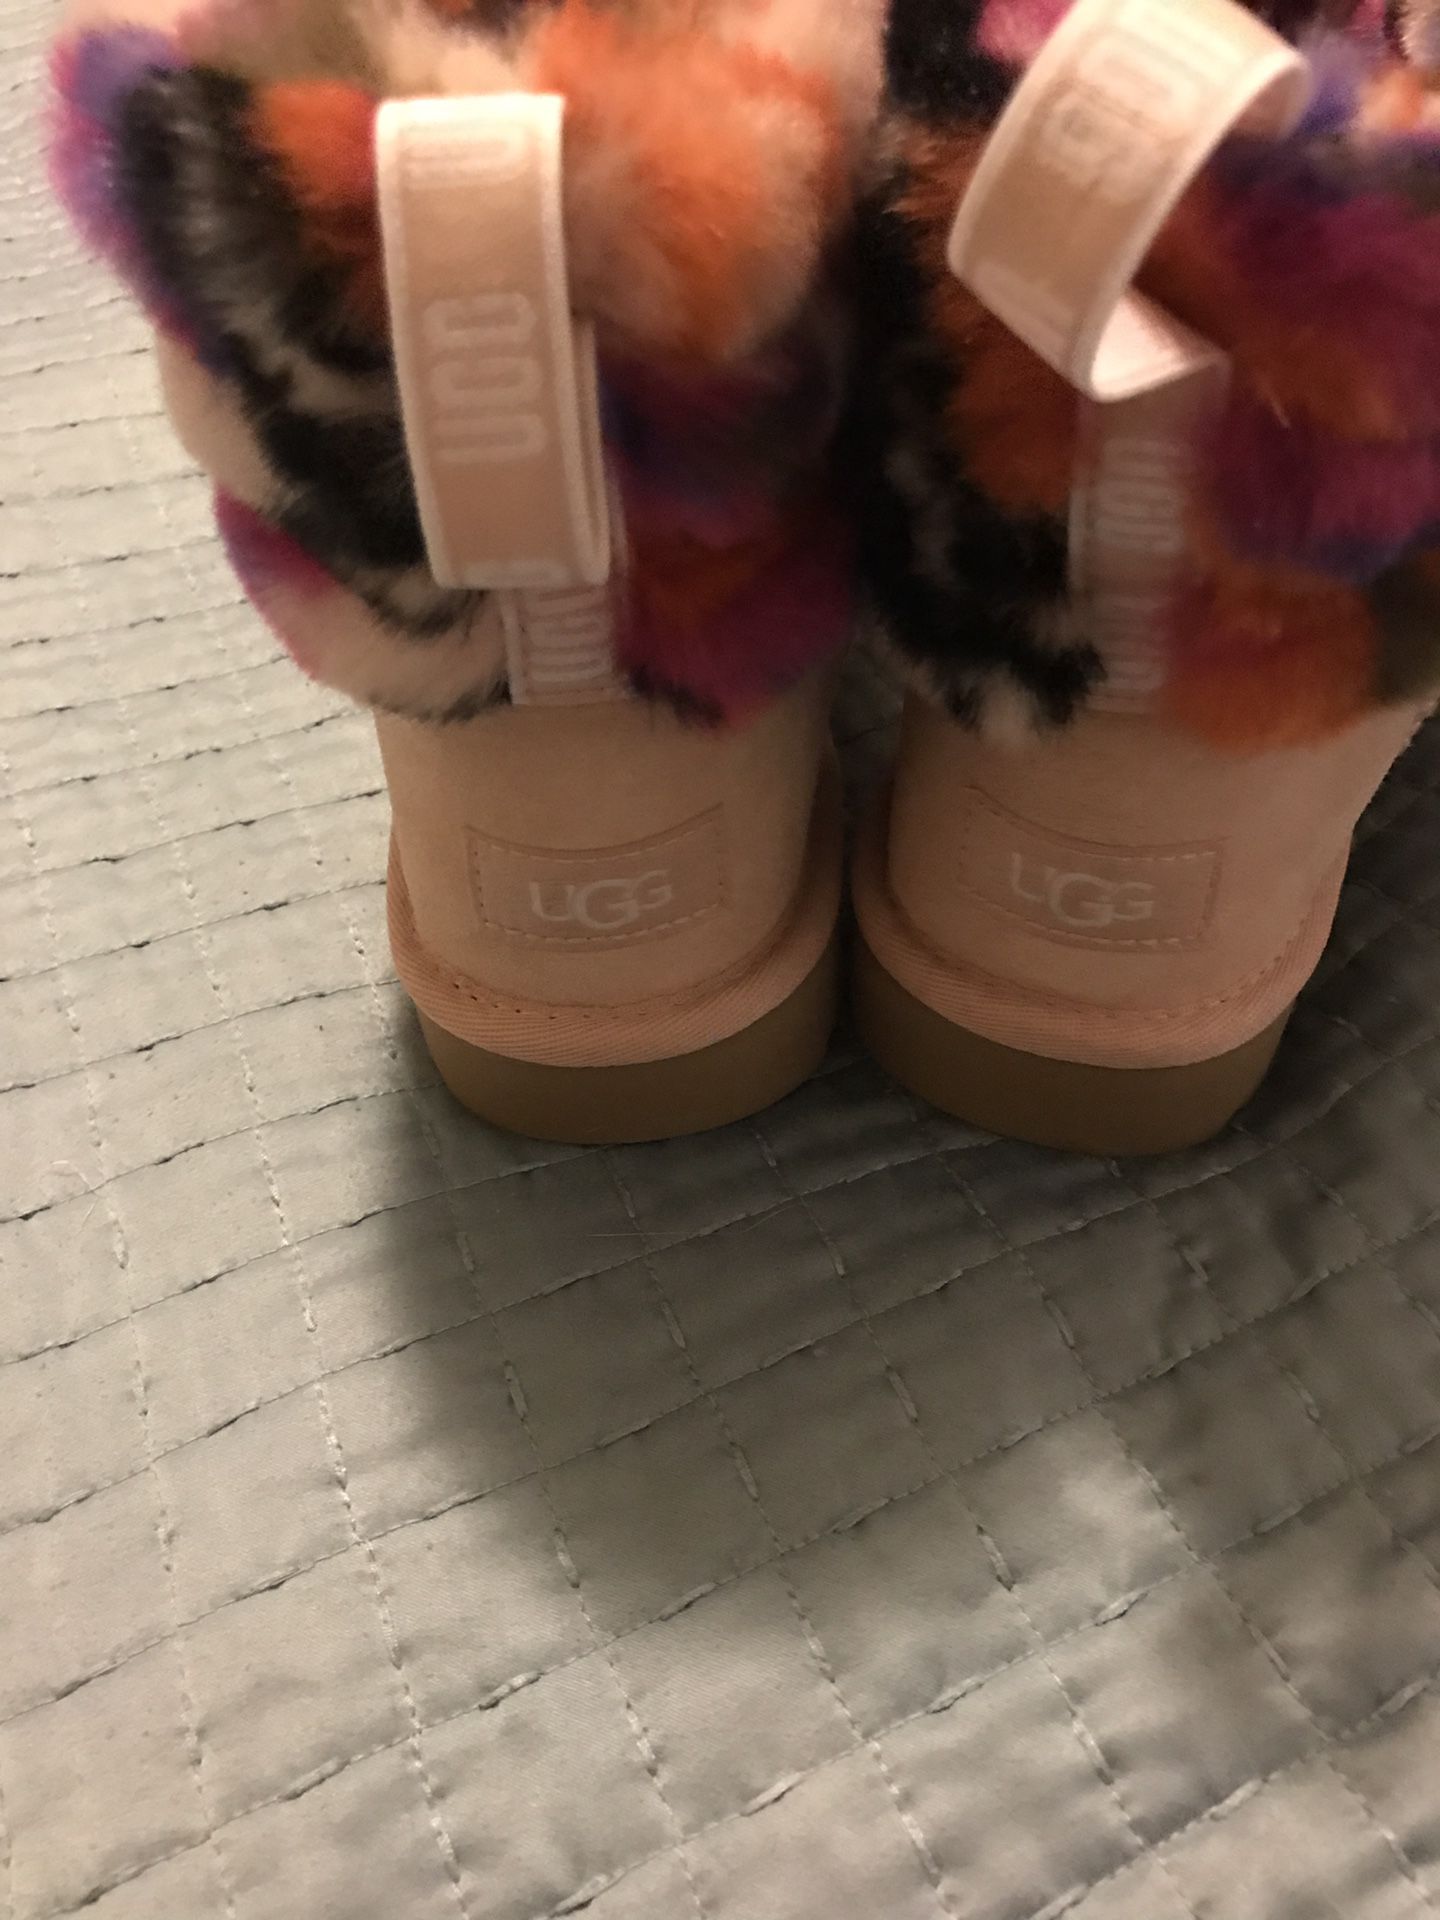 Ugg boots size 7